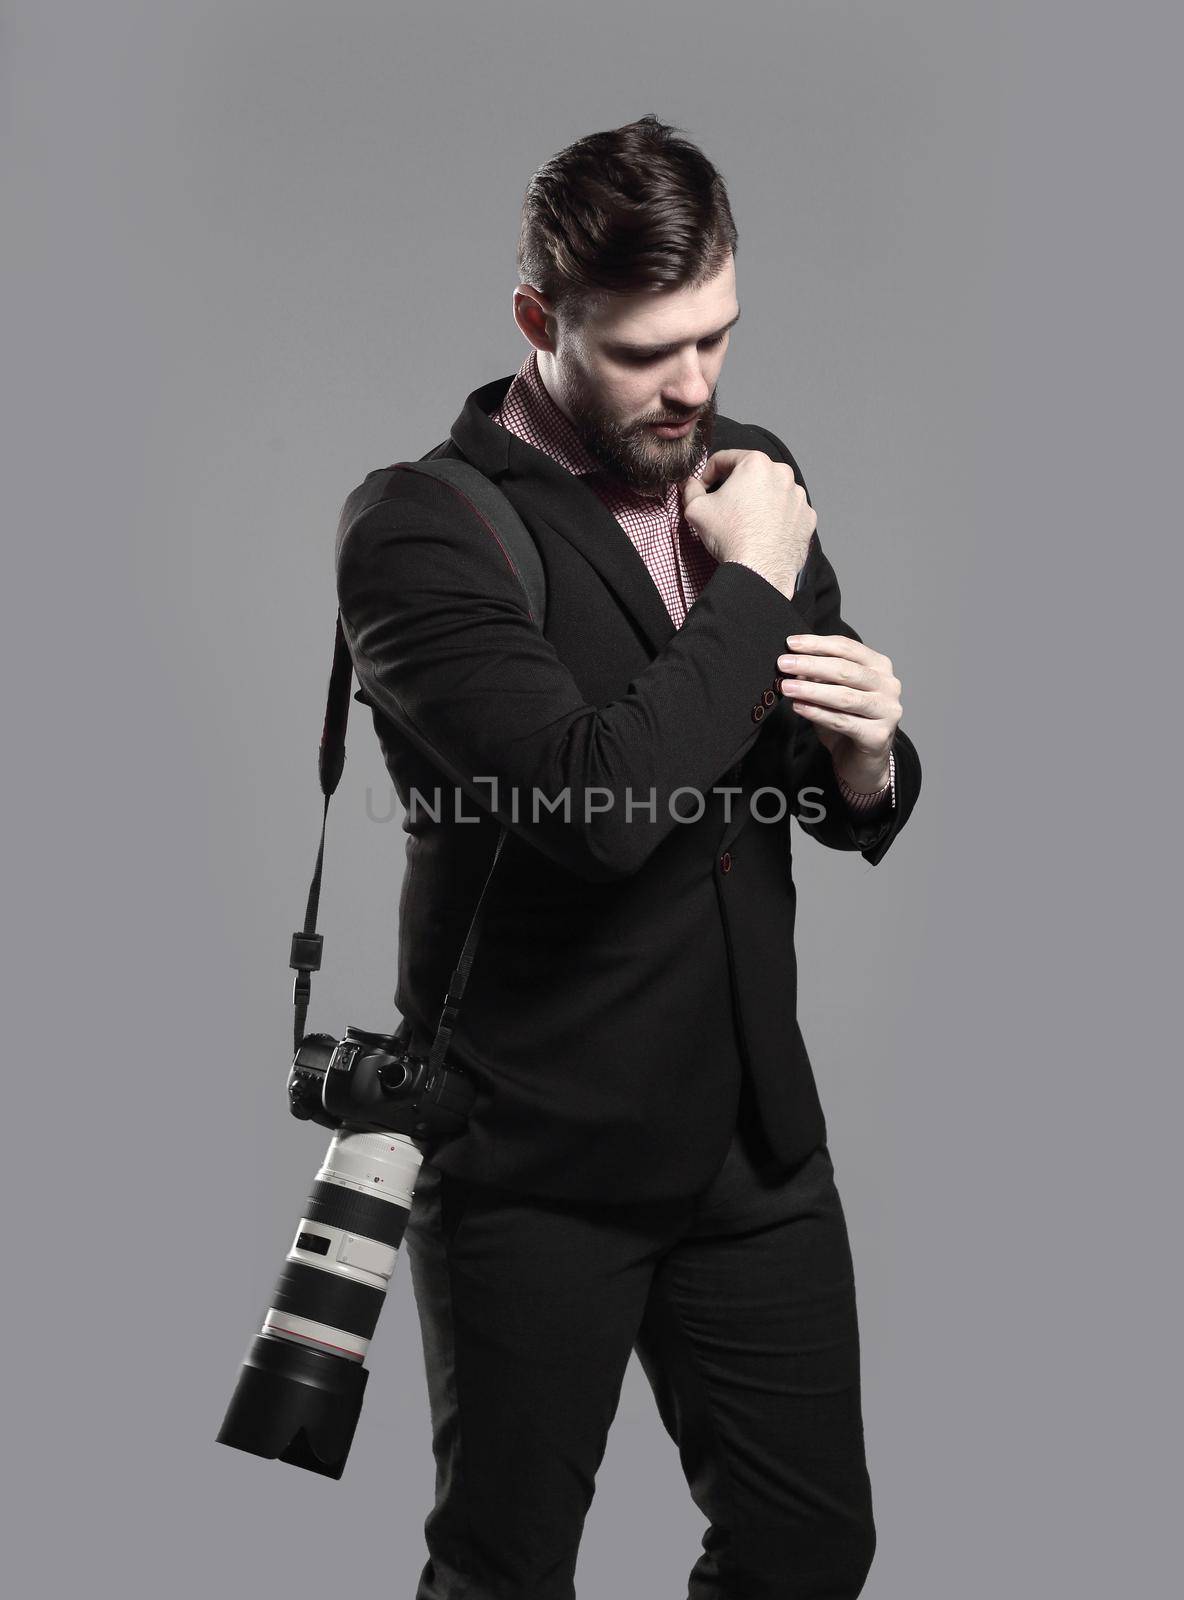 professional photographer with camera, adjusting a cufflink.isolated on grey background.